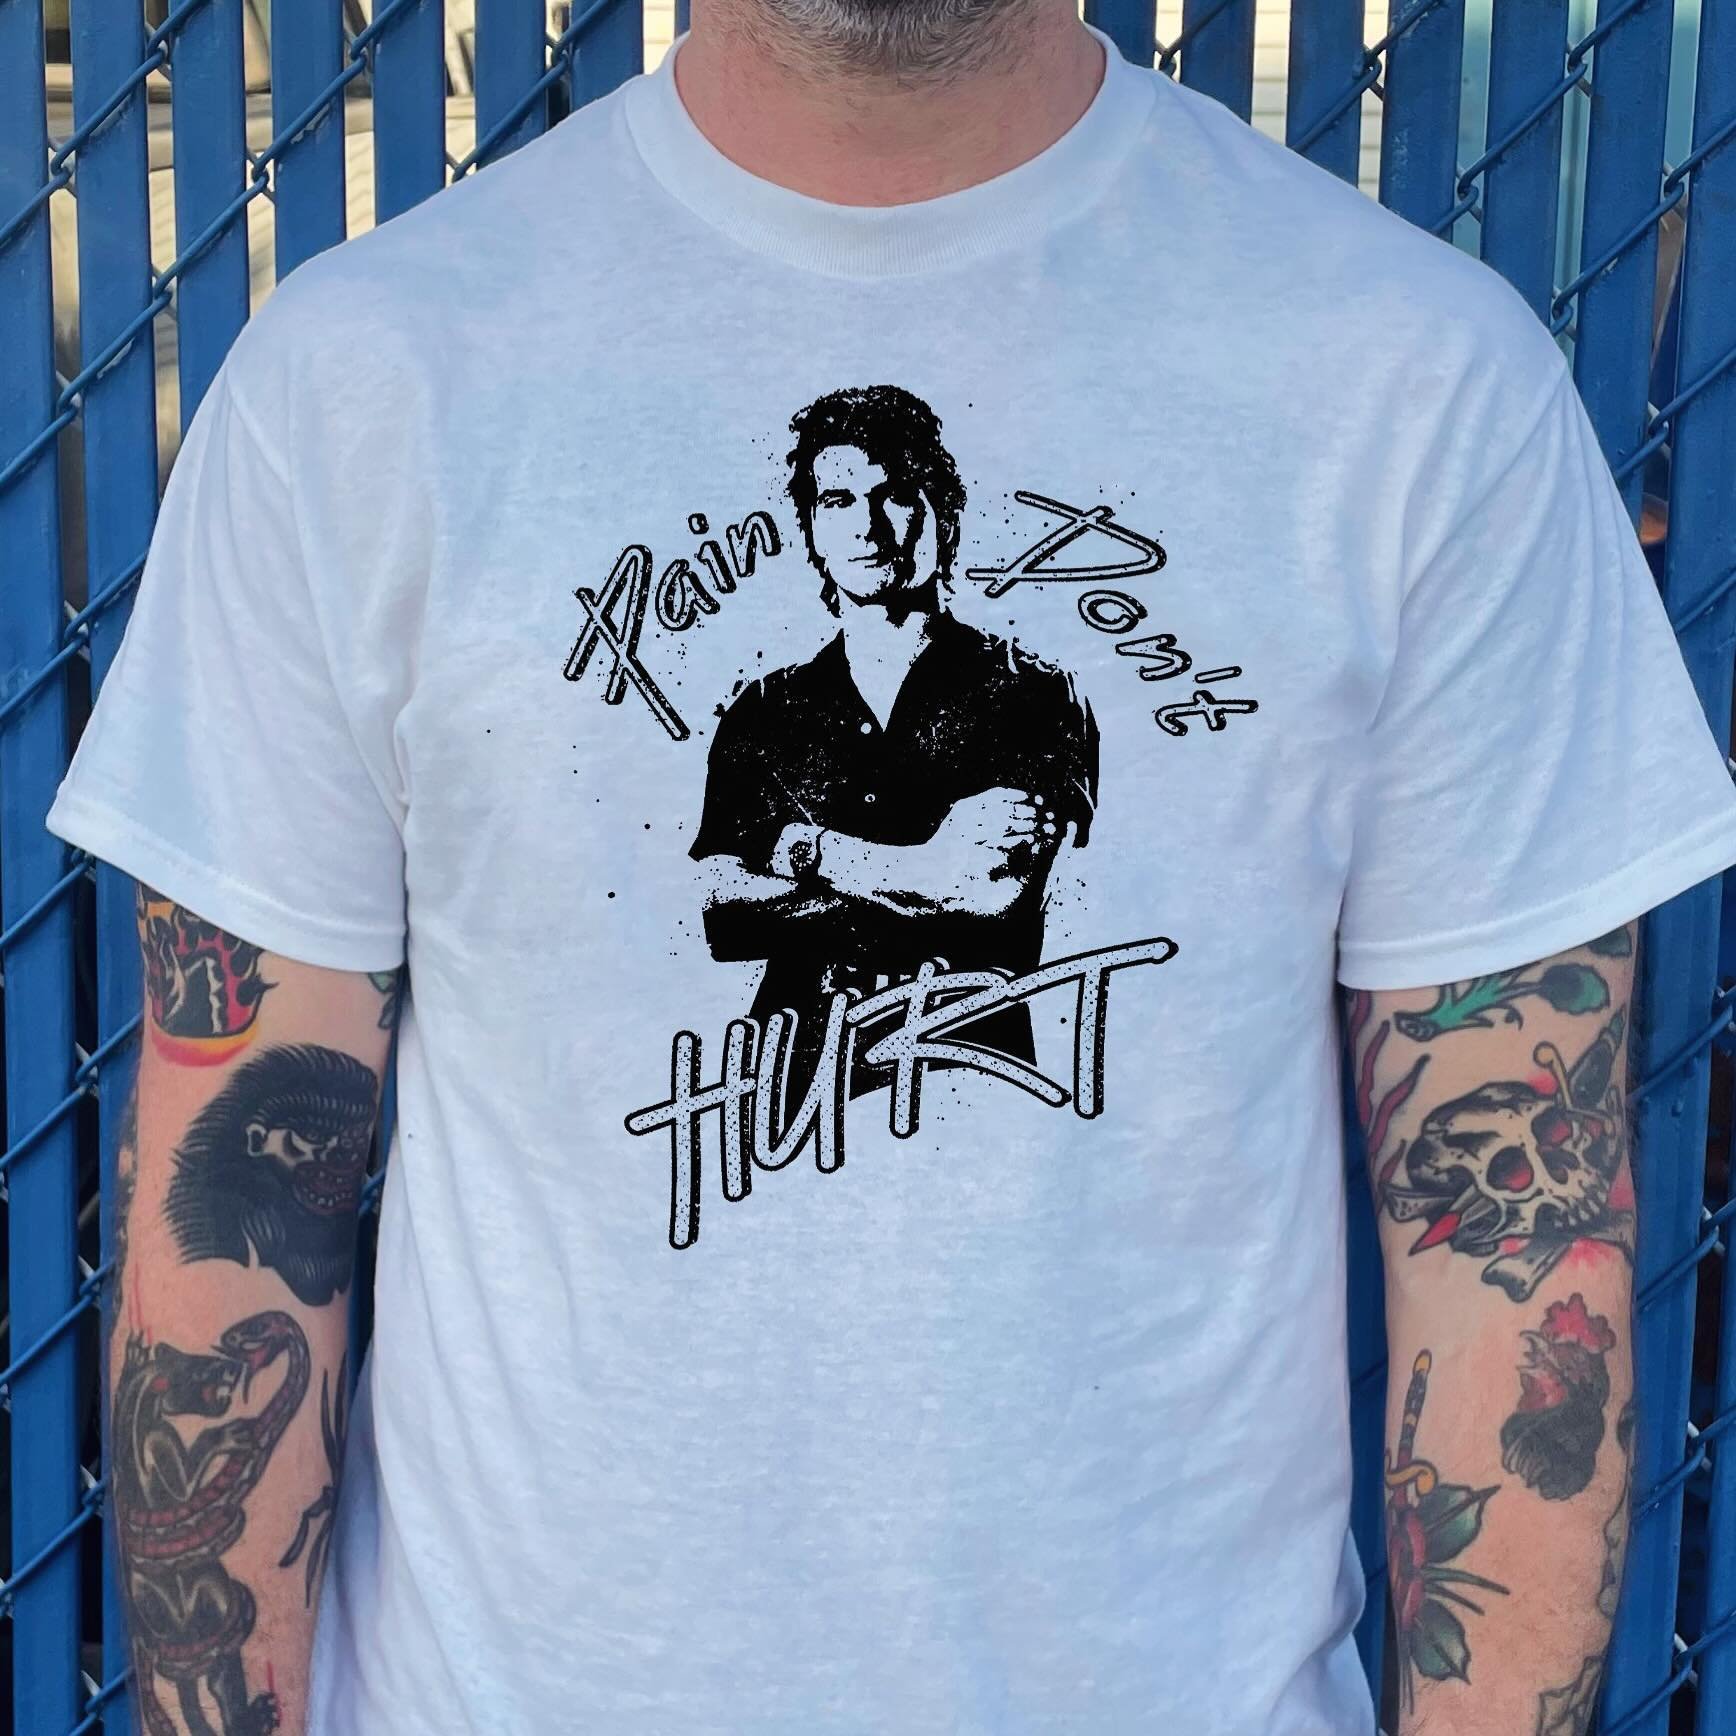 What&rsquo;s next for ol&rsquo; IP Freely having dominated the world of fine art? 

Bootlegging! The next frontier. 

Road House, Pain Don&rsquo;t Hurt tee is available in the Etsy store. Link in bio. Mother&rsquo;s Day is right around the corner so 